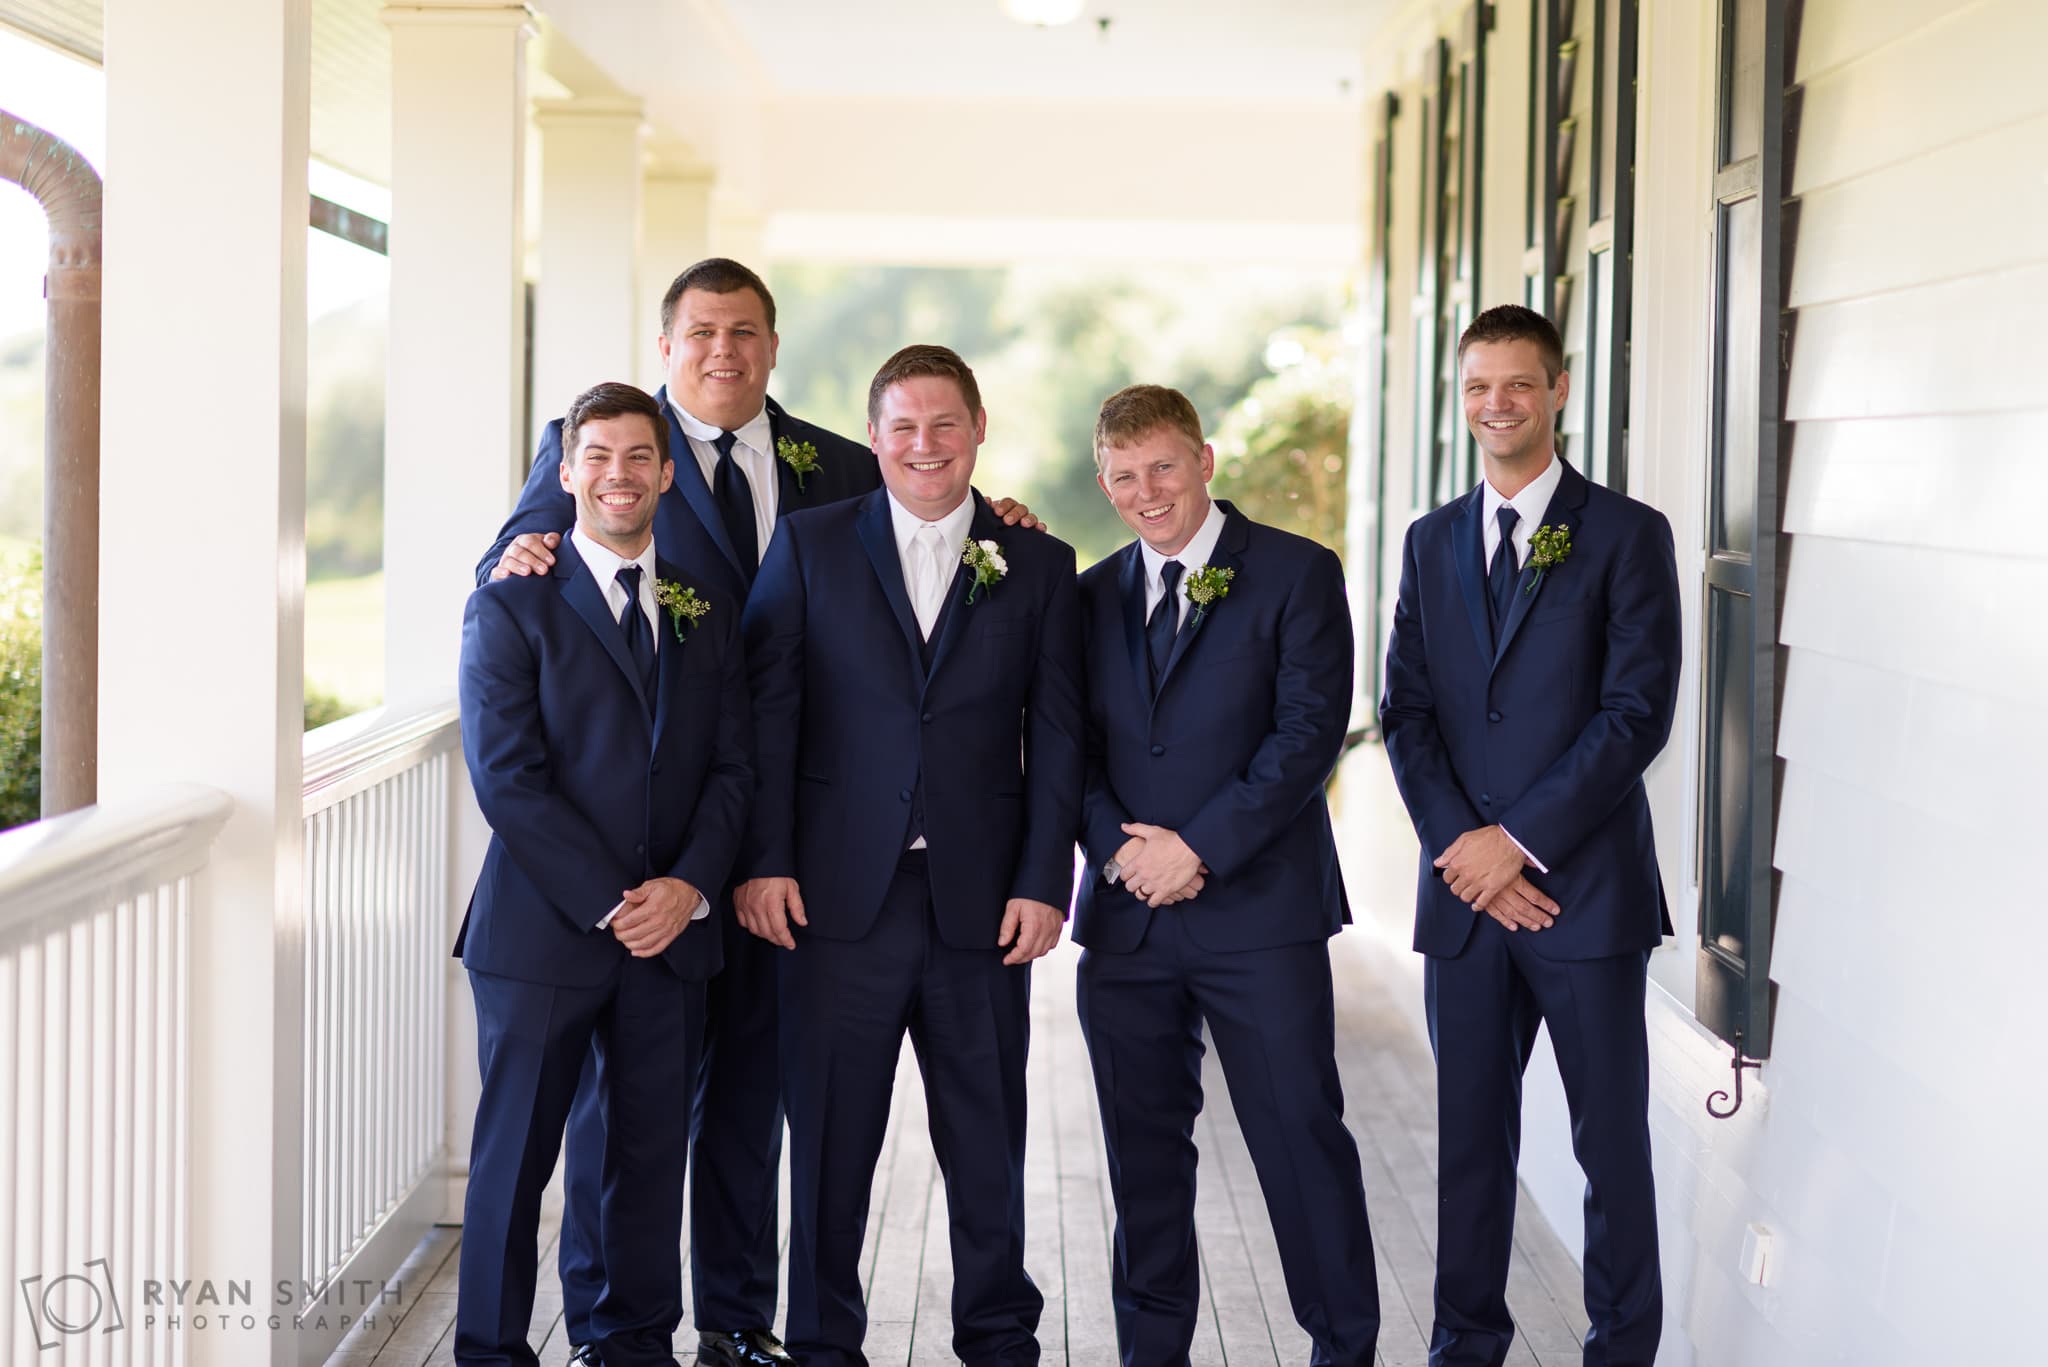 Pictures with the groomsmen before the ceremony - Dye Club at Barefoot Resort